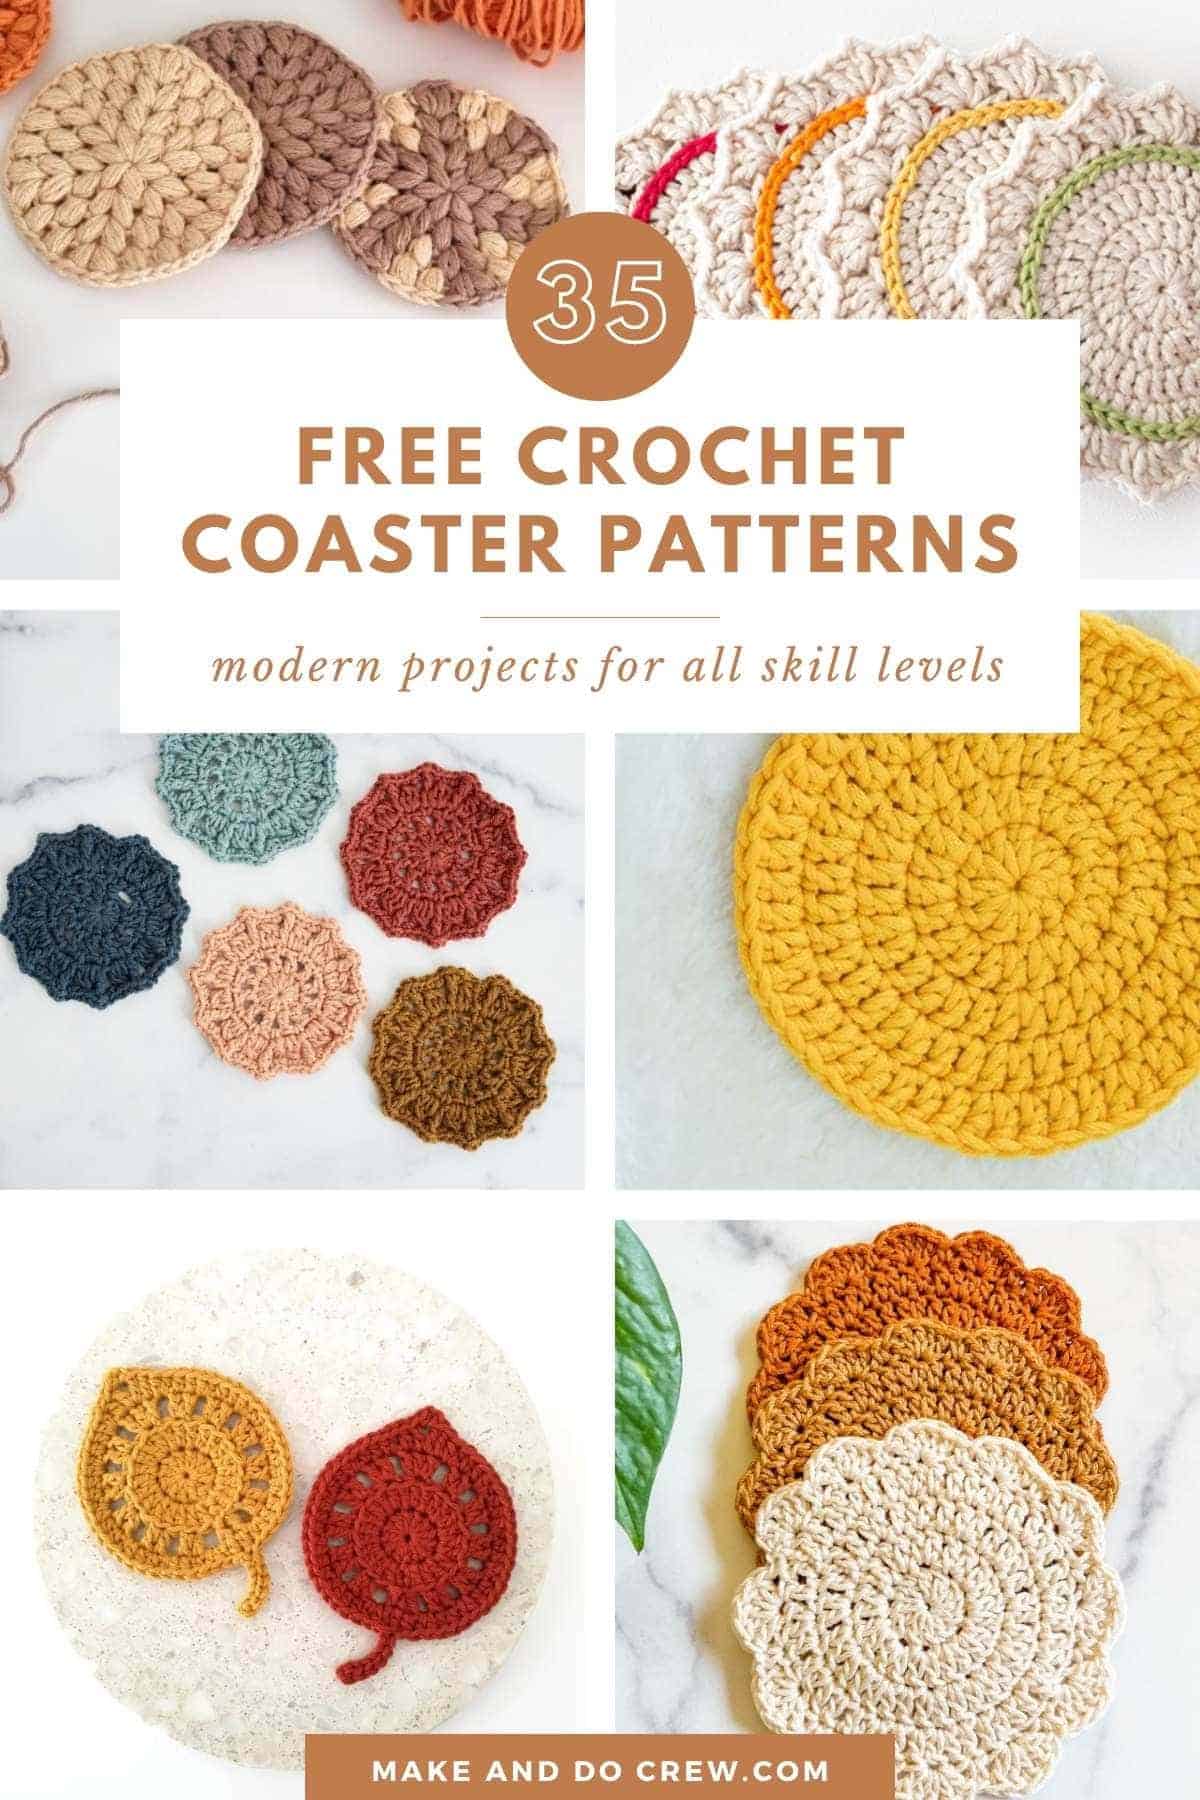 Collection of crochet coaster patterns for all skill levels.